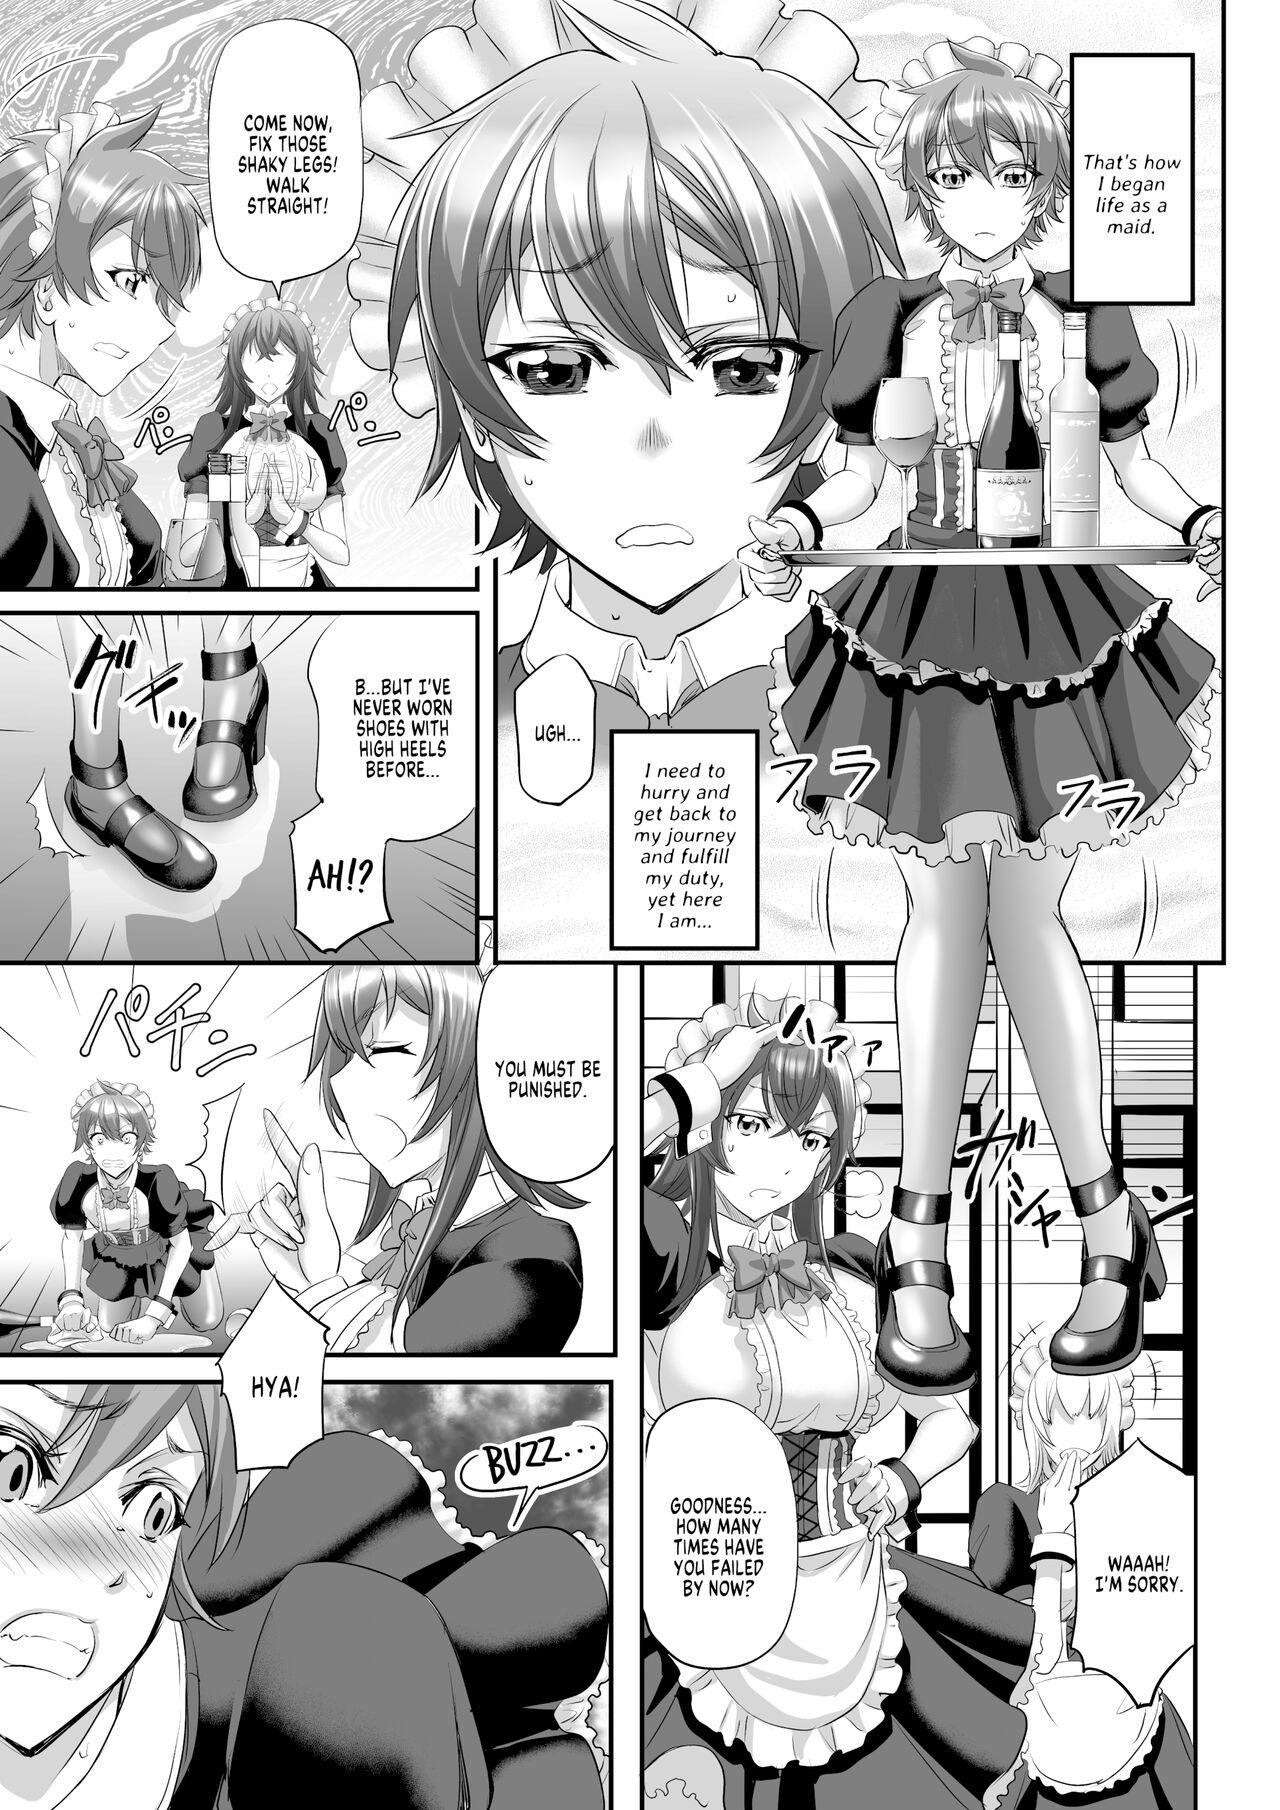 Amateur Asian MonMusu Quest! ~ Luka no Maid Shugyou | Monster Girl Quest! Luka’s Maid Training - Monster girl quest White - Page 7